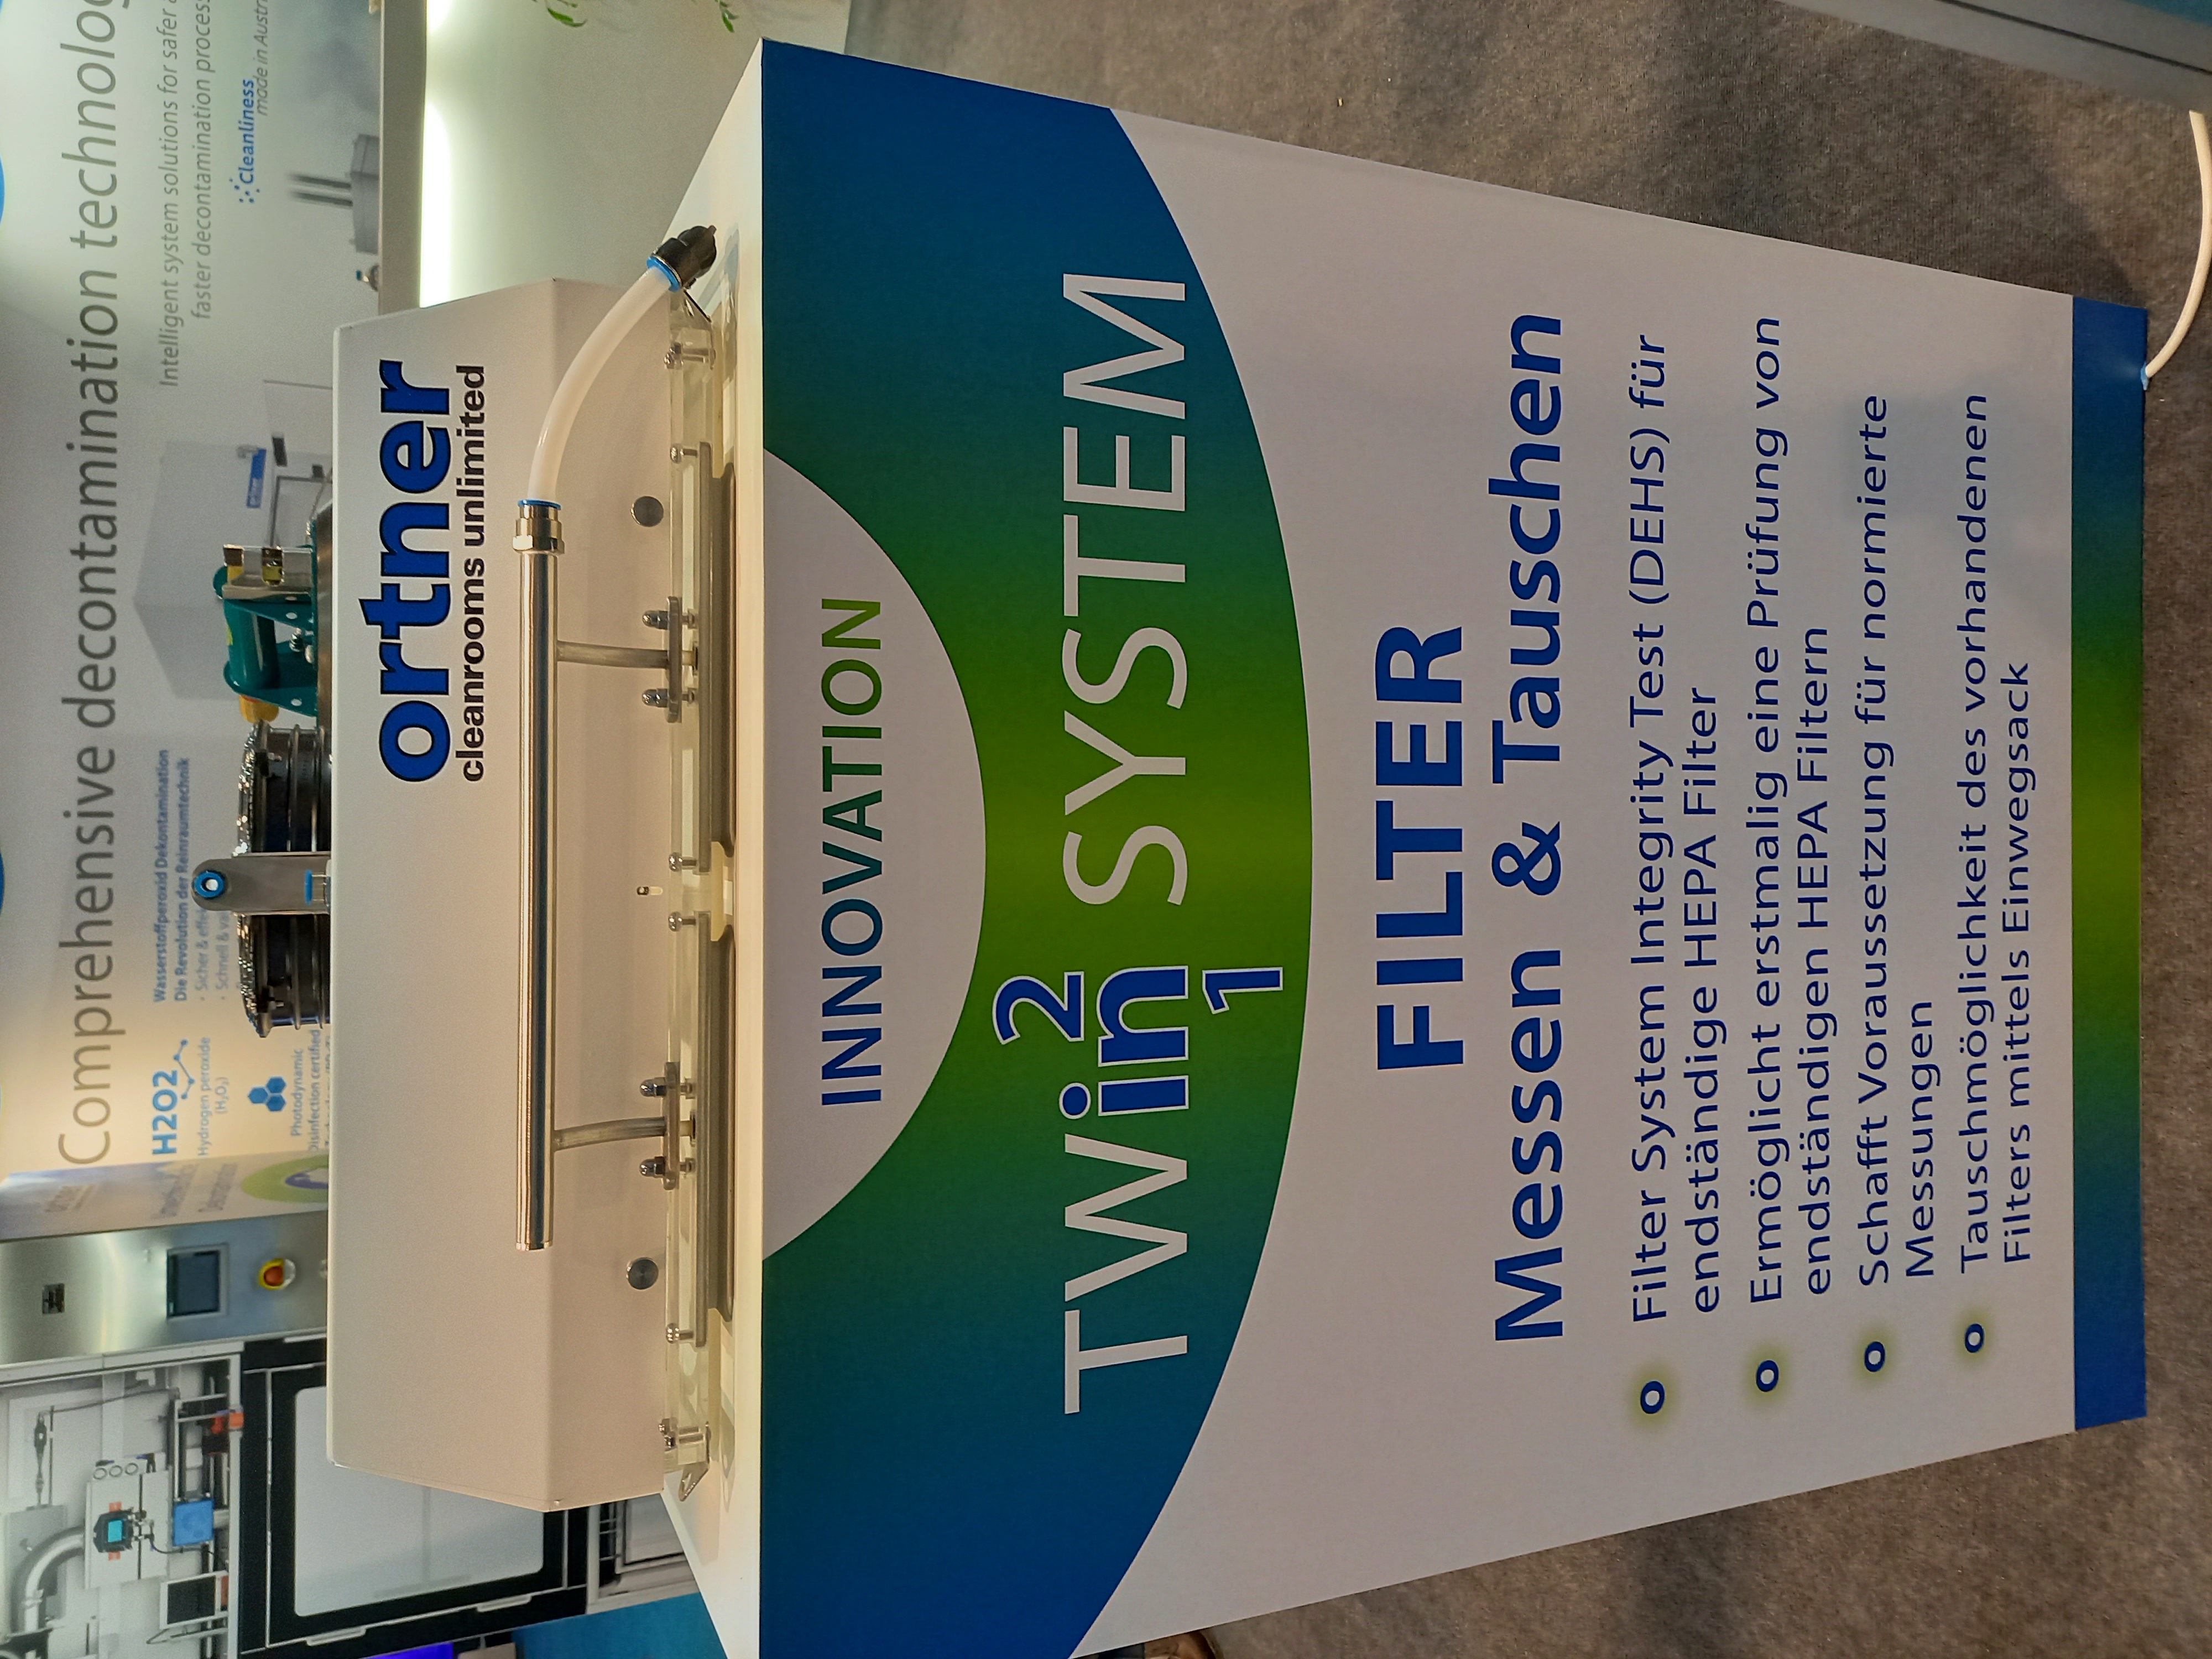 TWIN System Filter exchange and measurement from Ortner